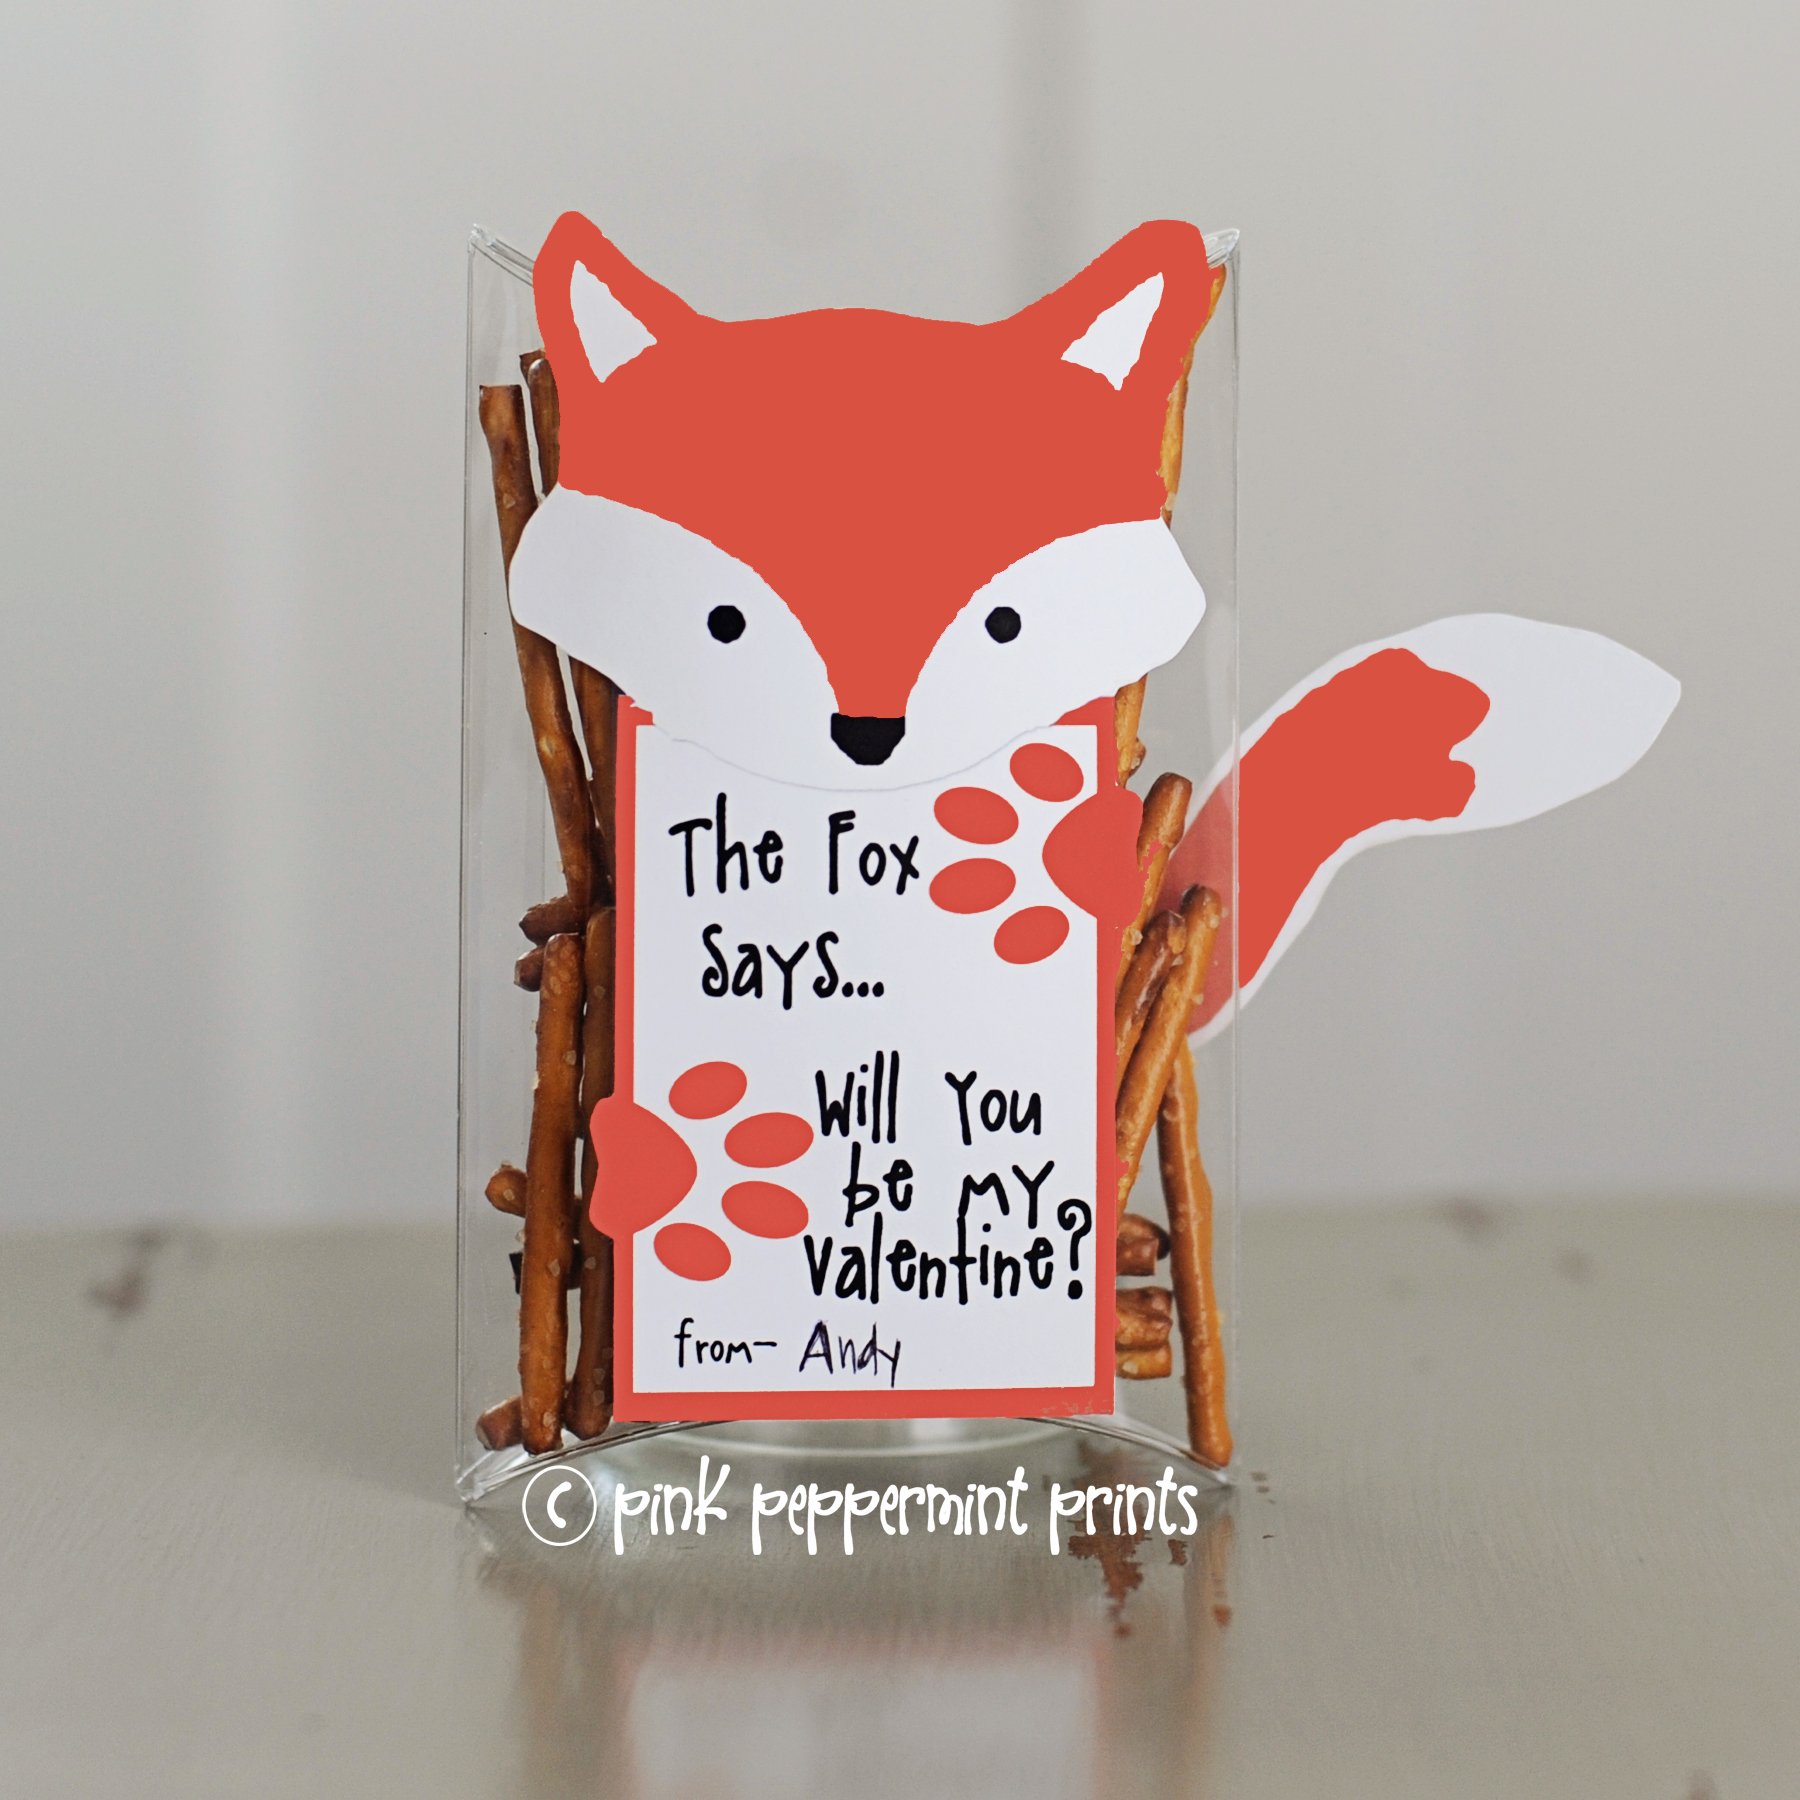 FREE-What-Does-the-Fox-Say-Valentine-Printable